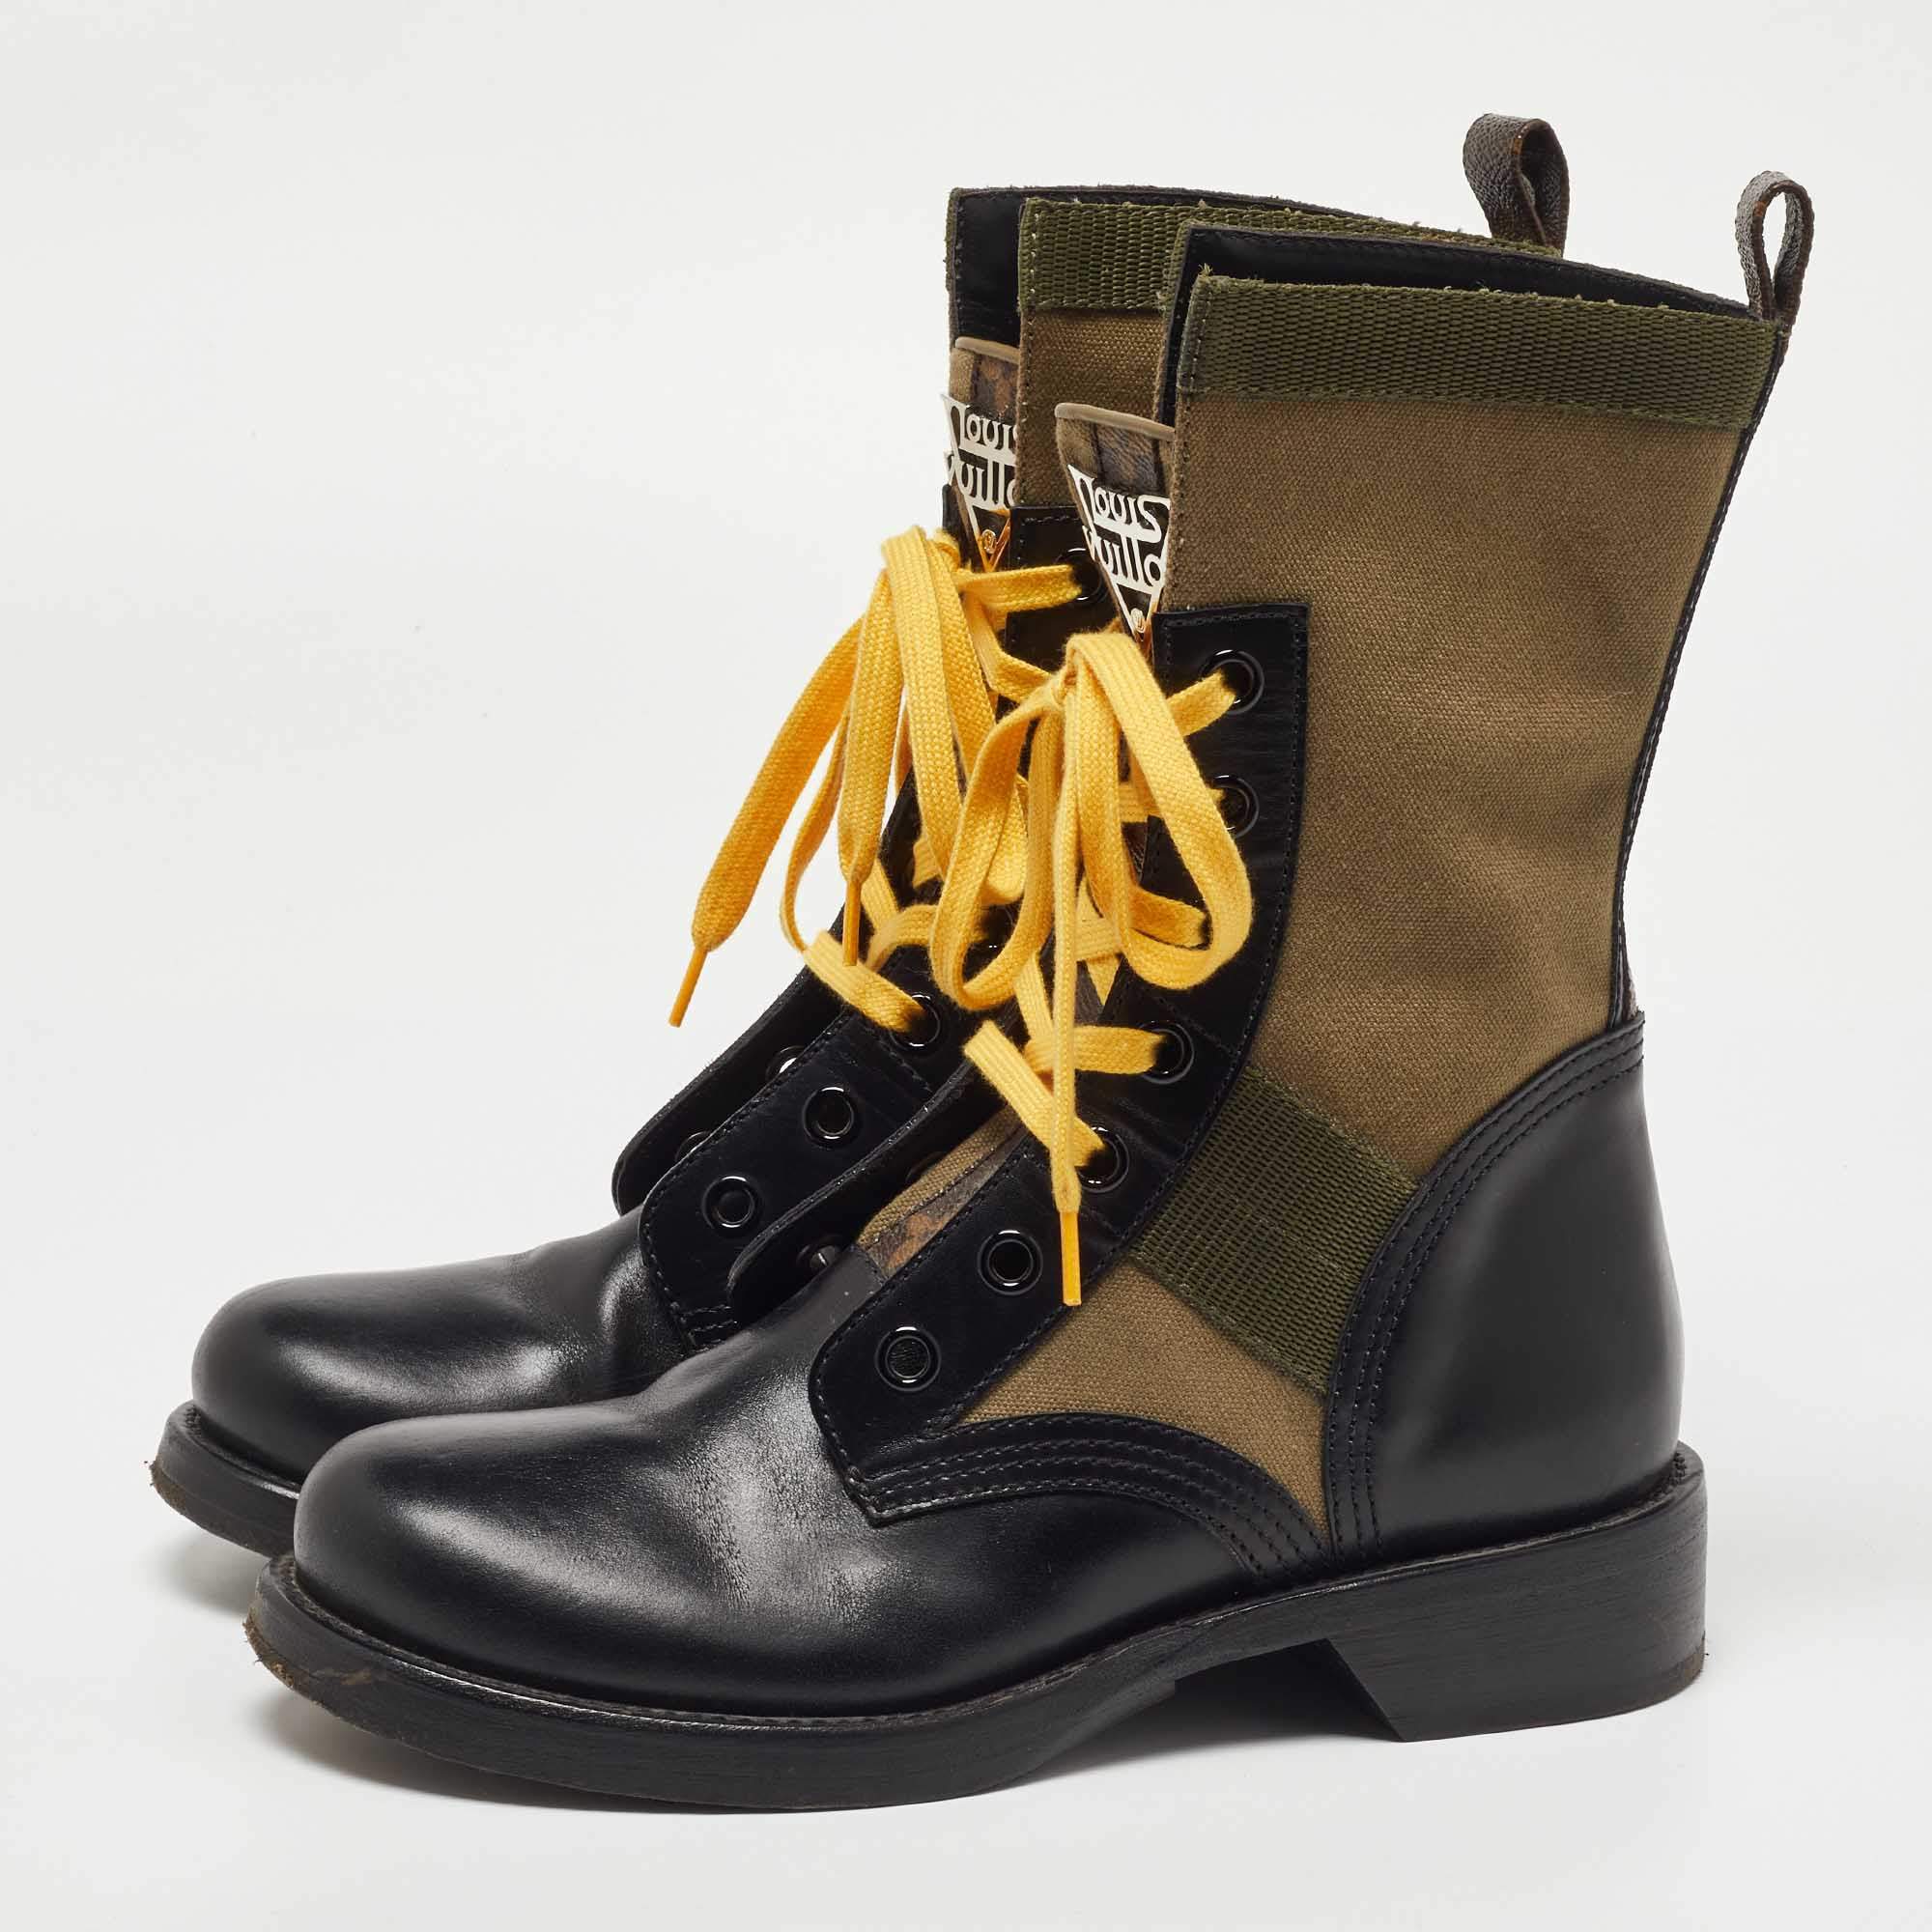 Louis Vuitton Green/Black Canvas and Leather Midcalf Boots Size